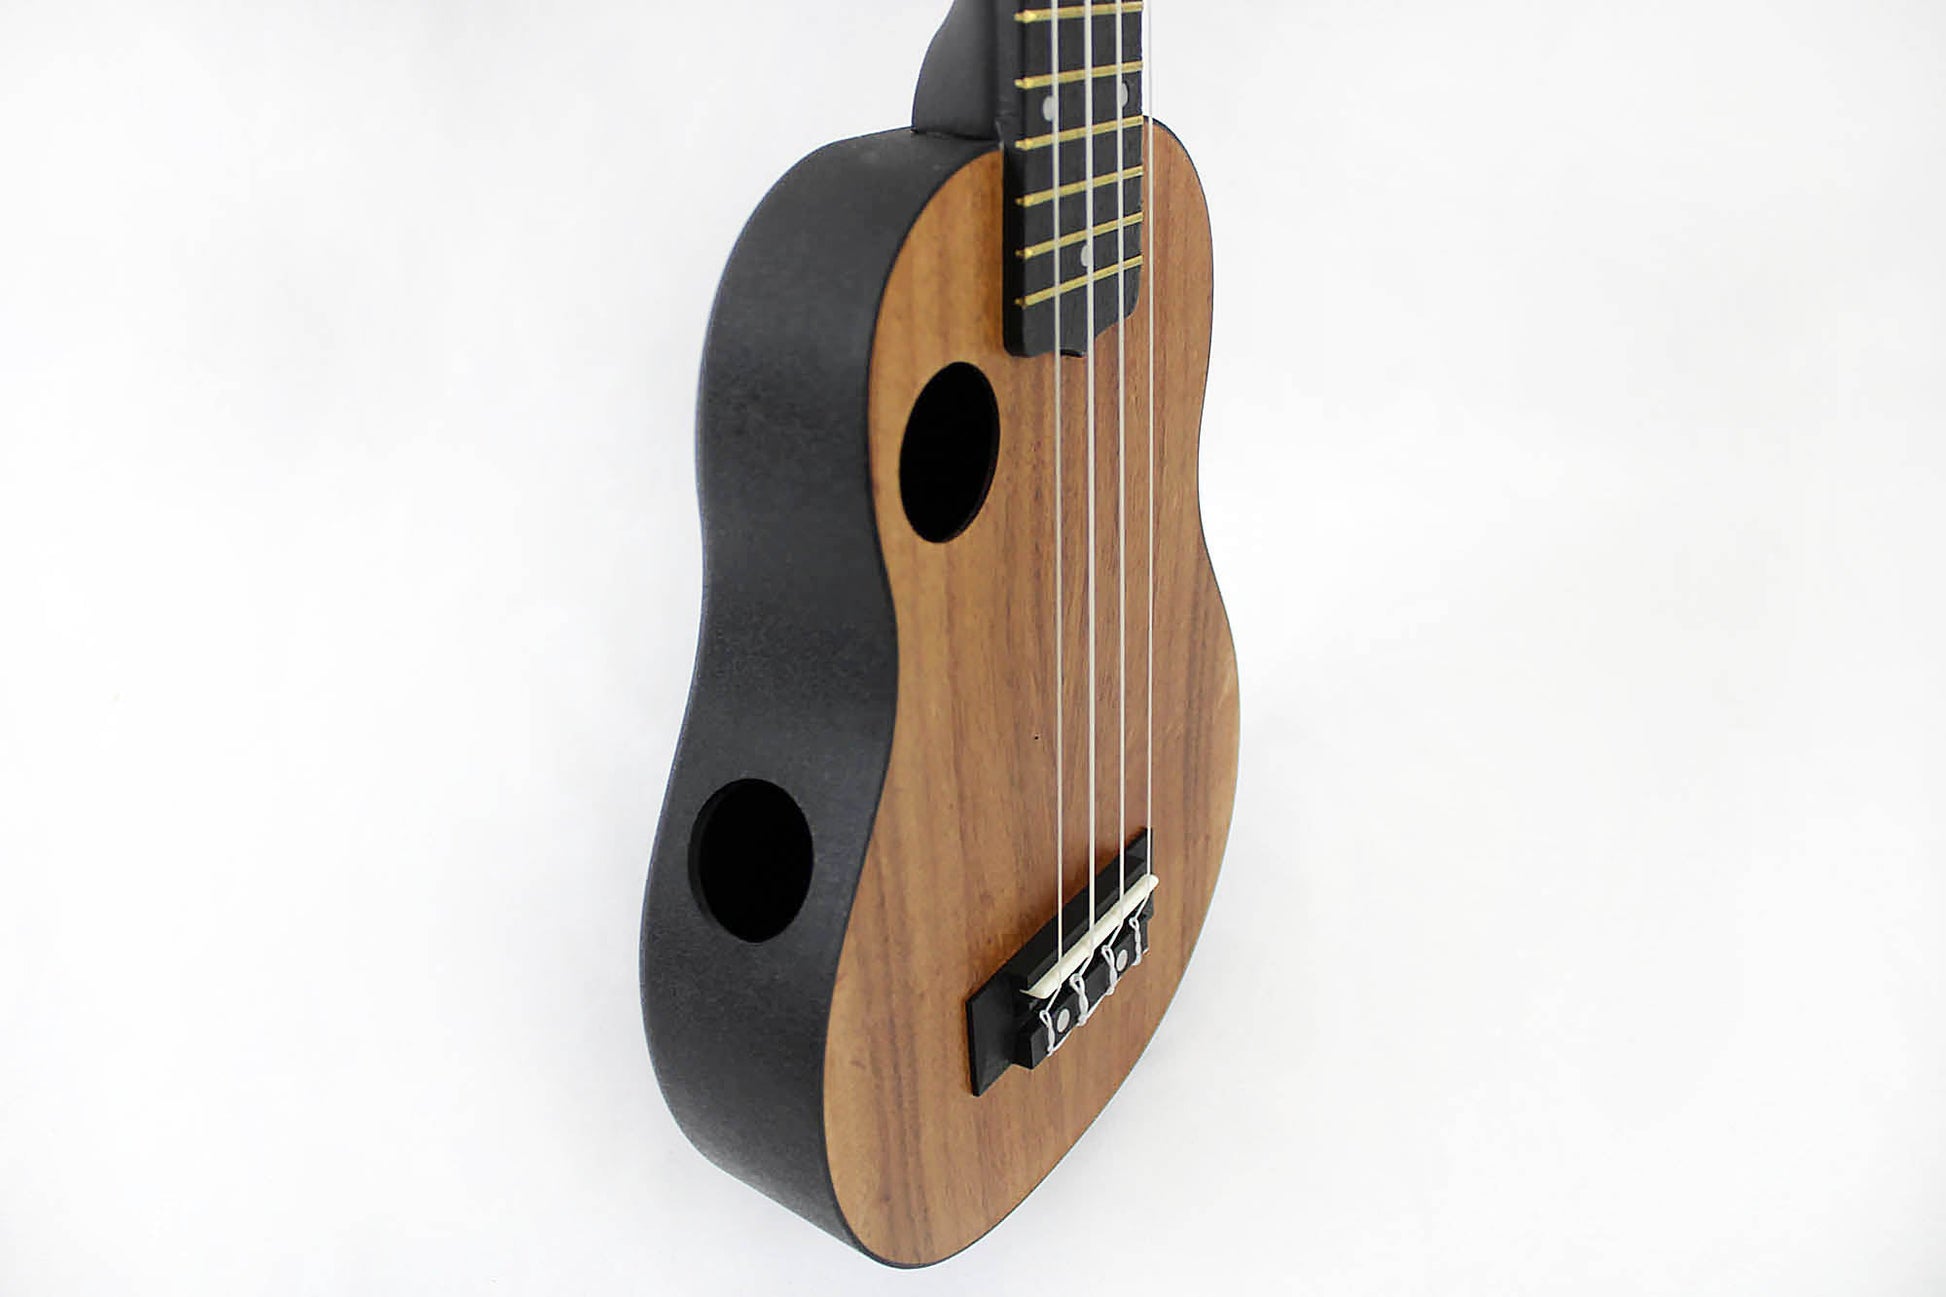 This is the front side view of an Amahi HCLF660 ABS Koa Top Soprano.